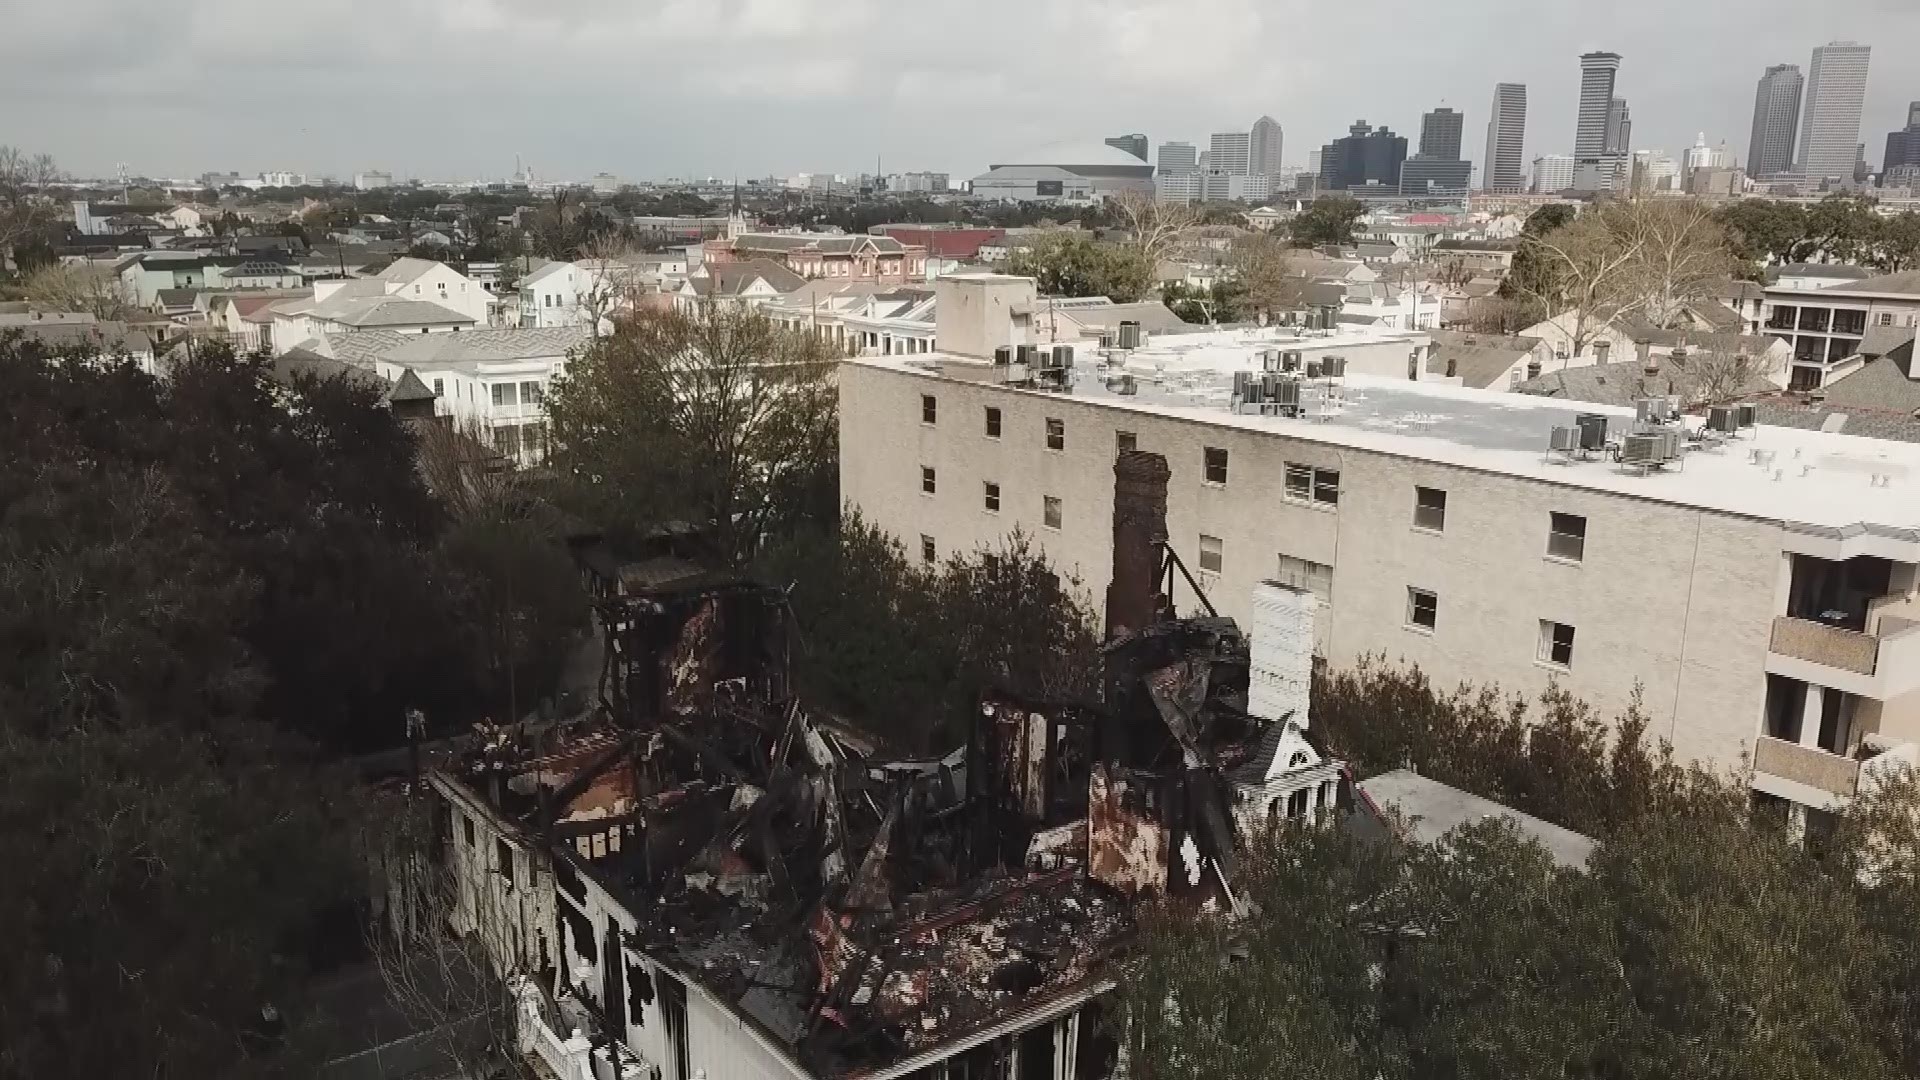 Drone footage shows some of the extent of the damage to the home at 2525 St. Charles Avenue after the 7-alarm fire Wednesday.